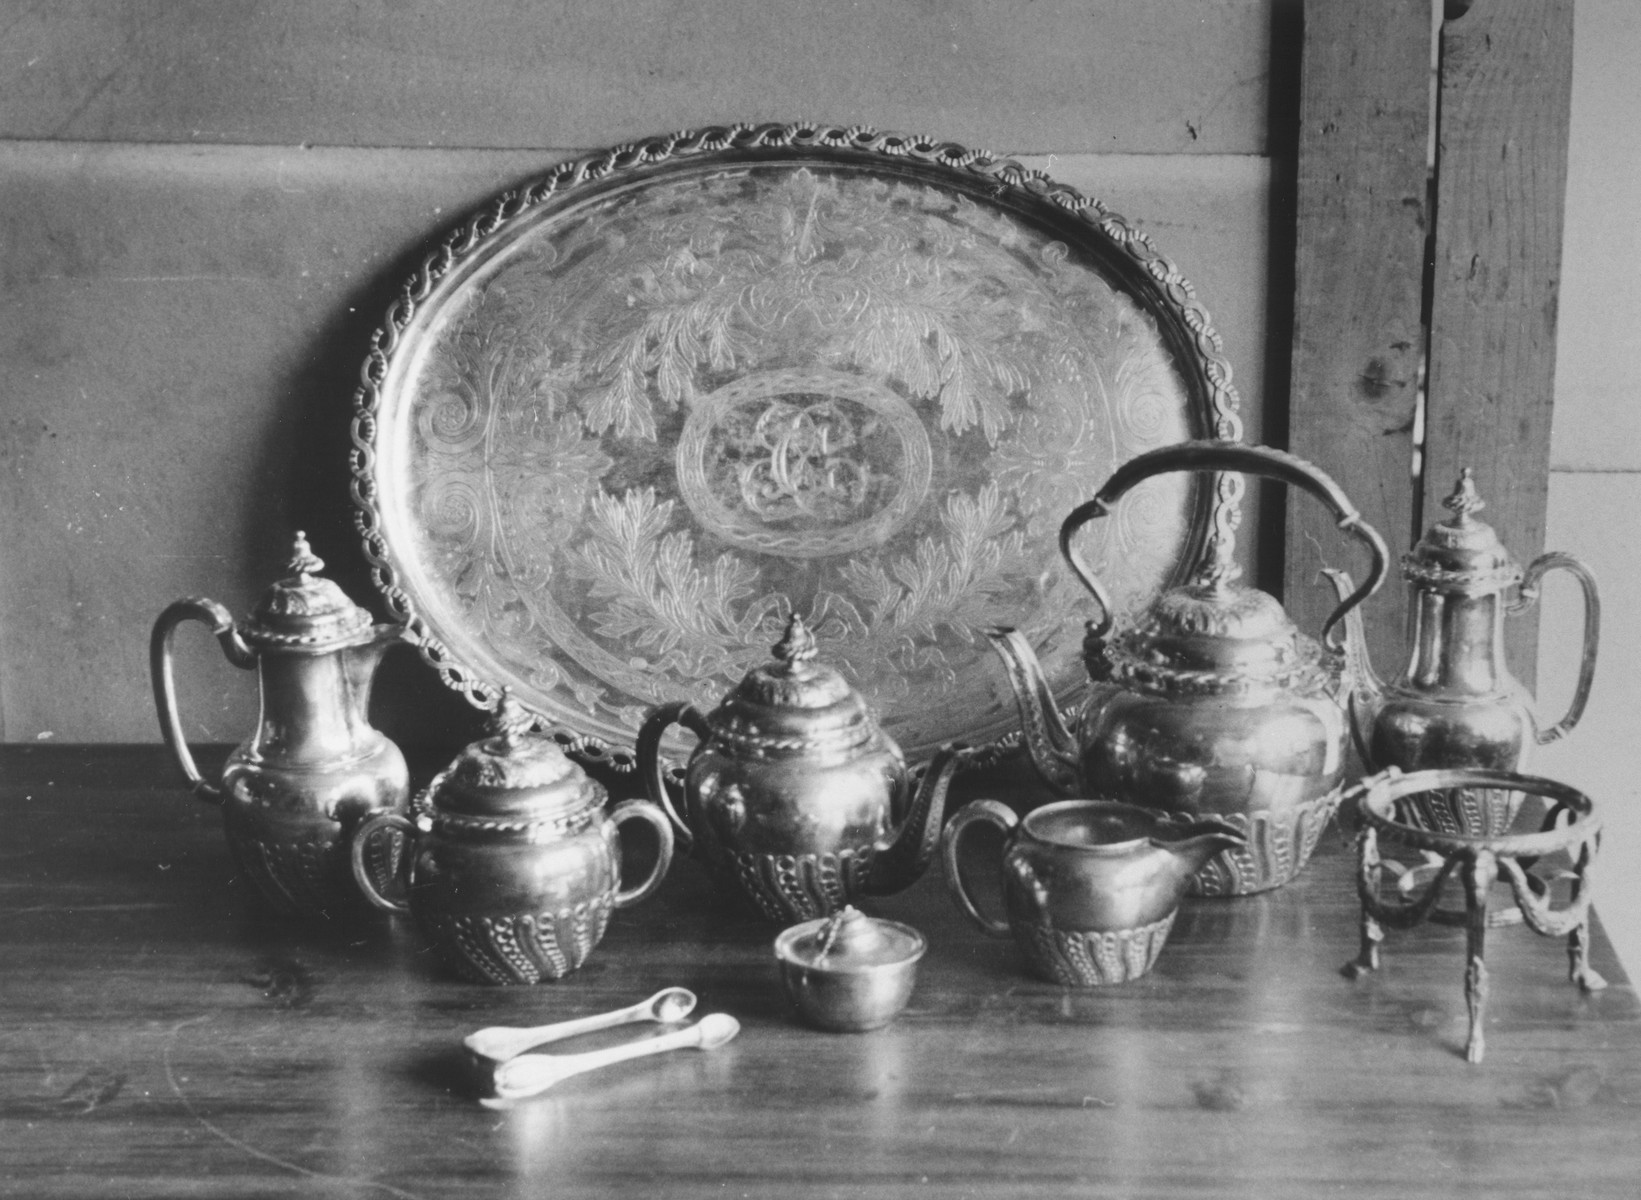 Display of a silver coffee set, confiscated from a Jewish household.